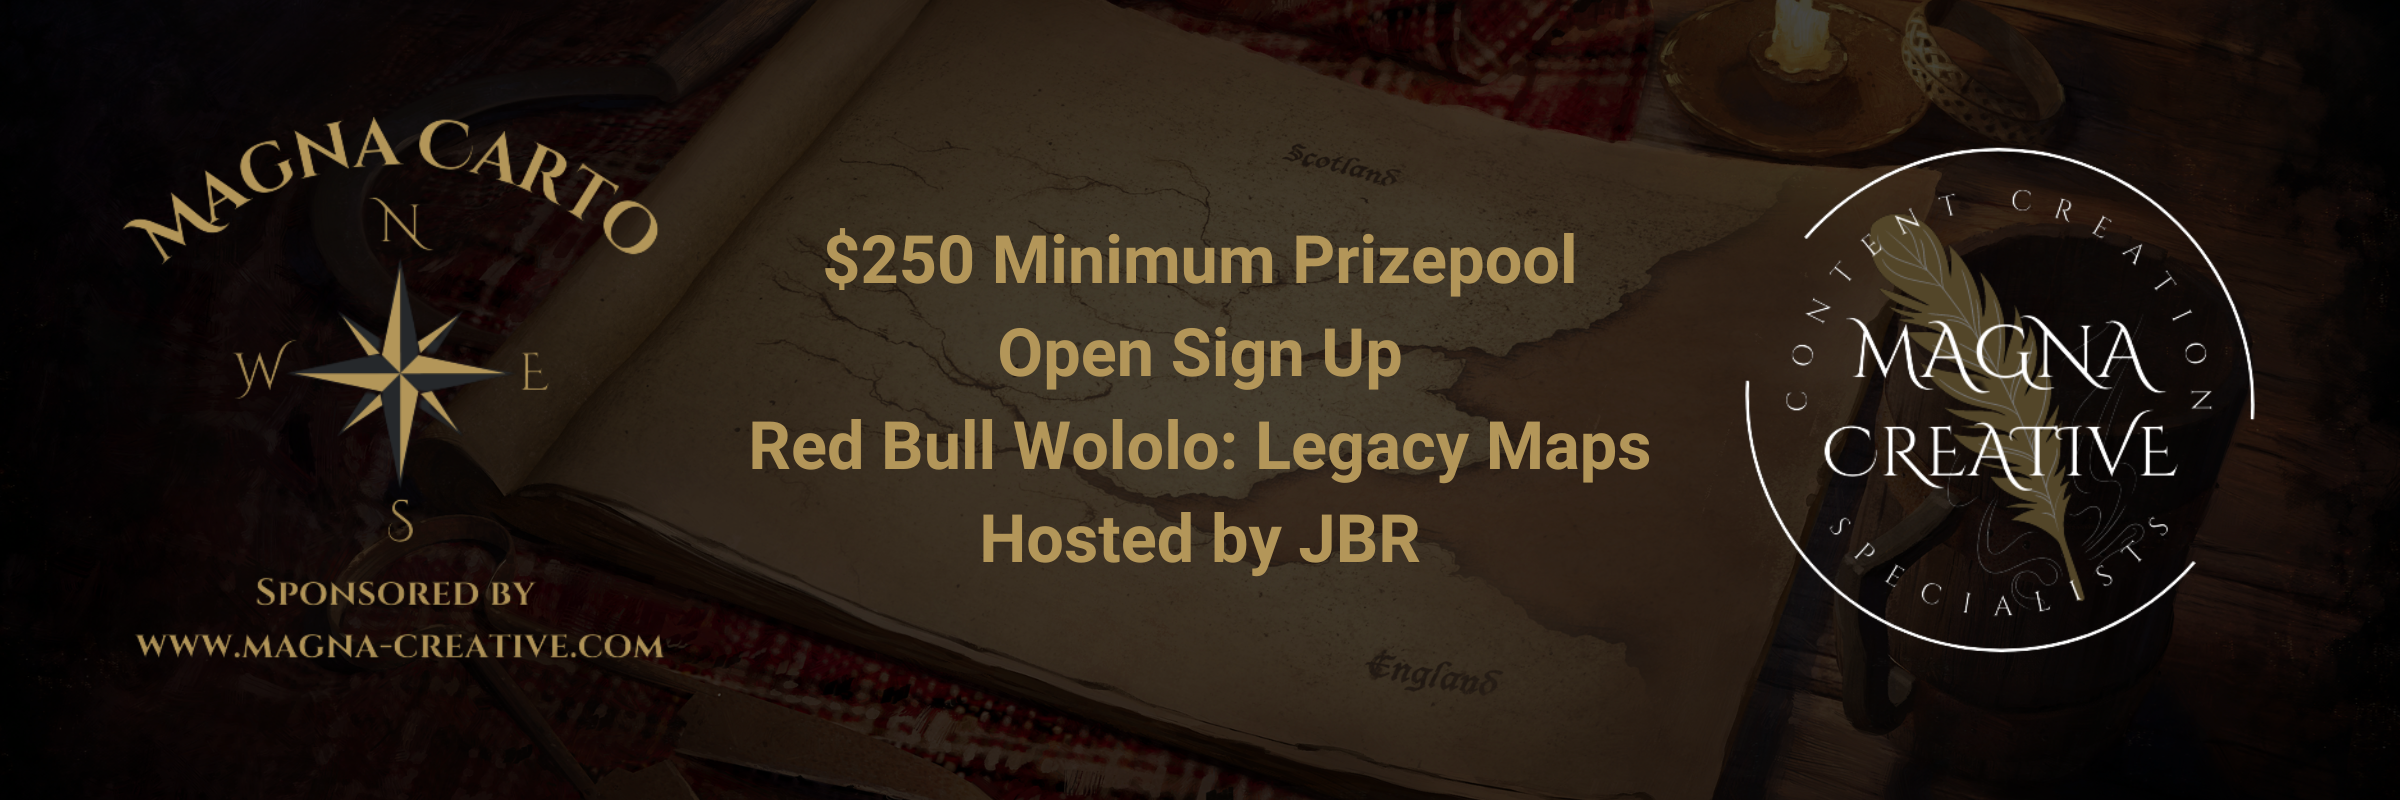 $250 Minimum Prizepool Open Sign Up Red Bull Wololo Legacy Maps Hosted by JBR.png